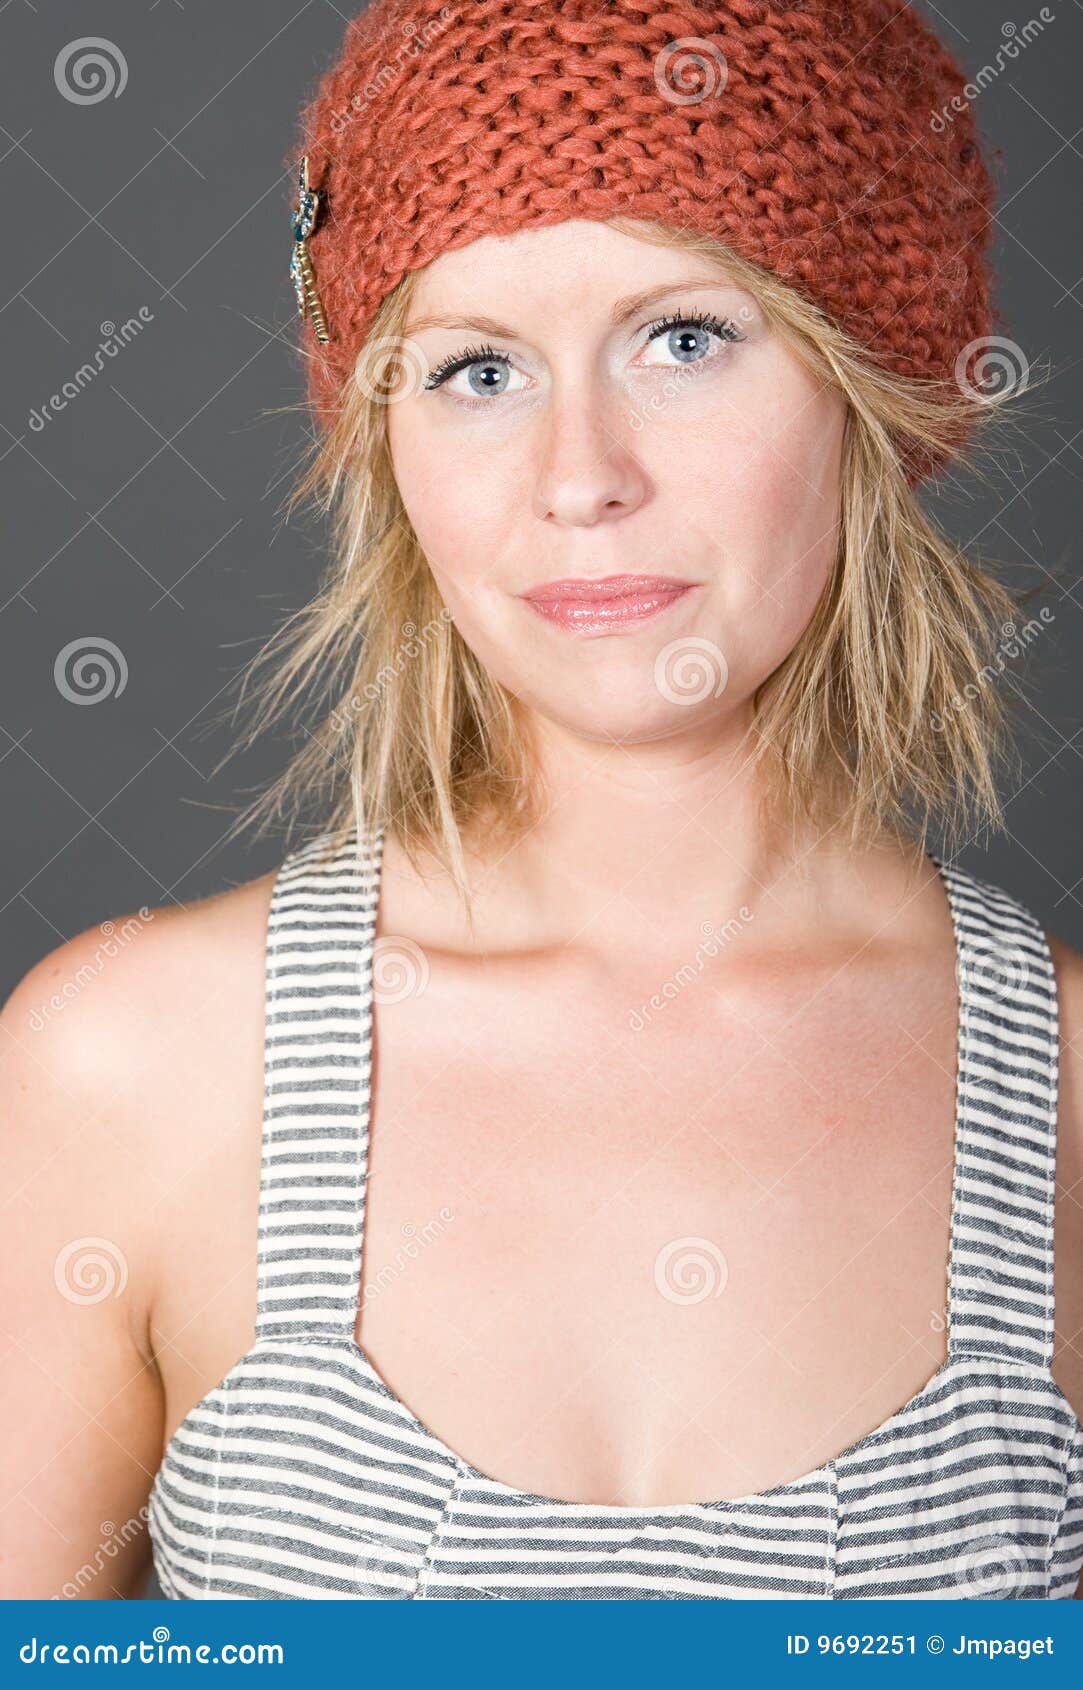 Cute Blonde Girl In Beanie Hat Smiling Stock Image Image